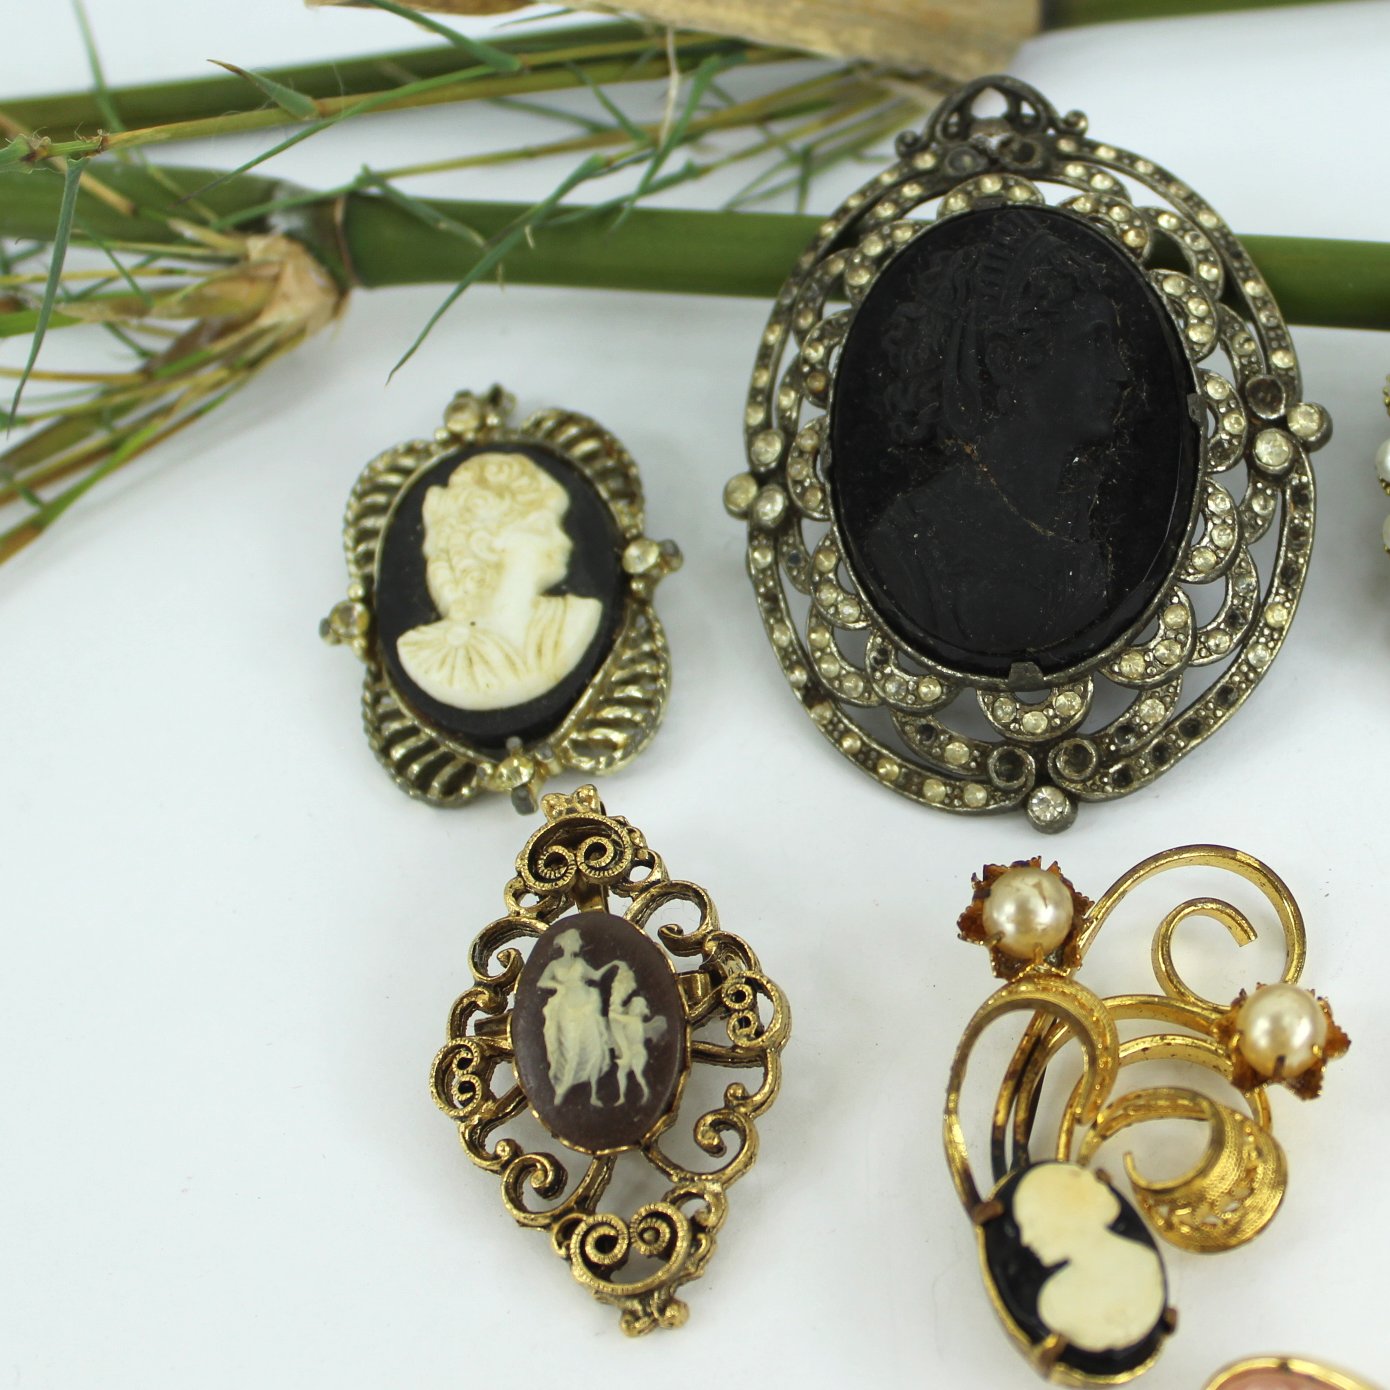 Collection Cameo Jewelry DIY Project Pins Earrings Lockets Repurpose closeup pins